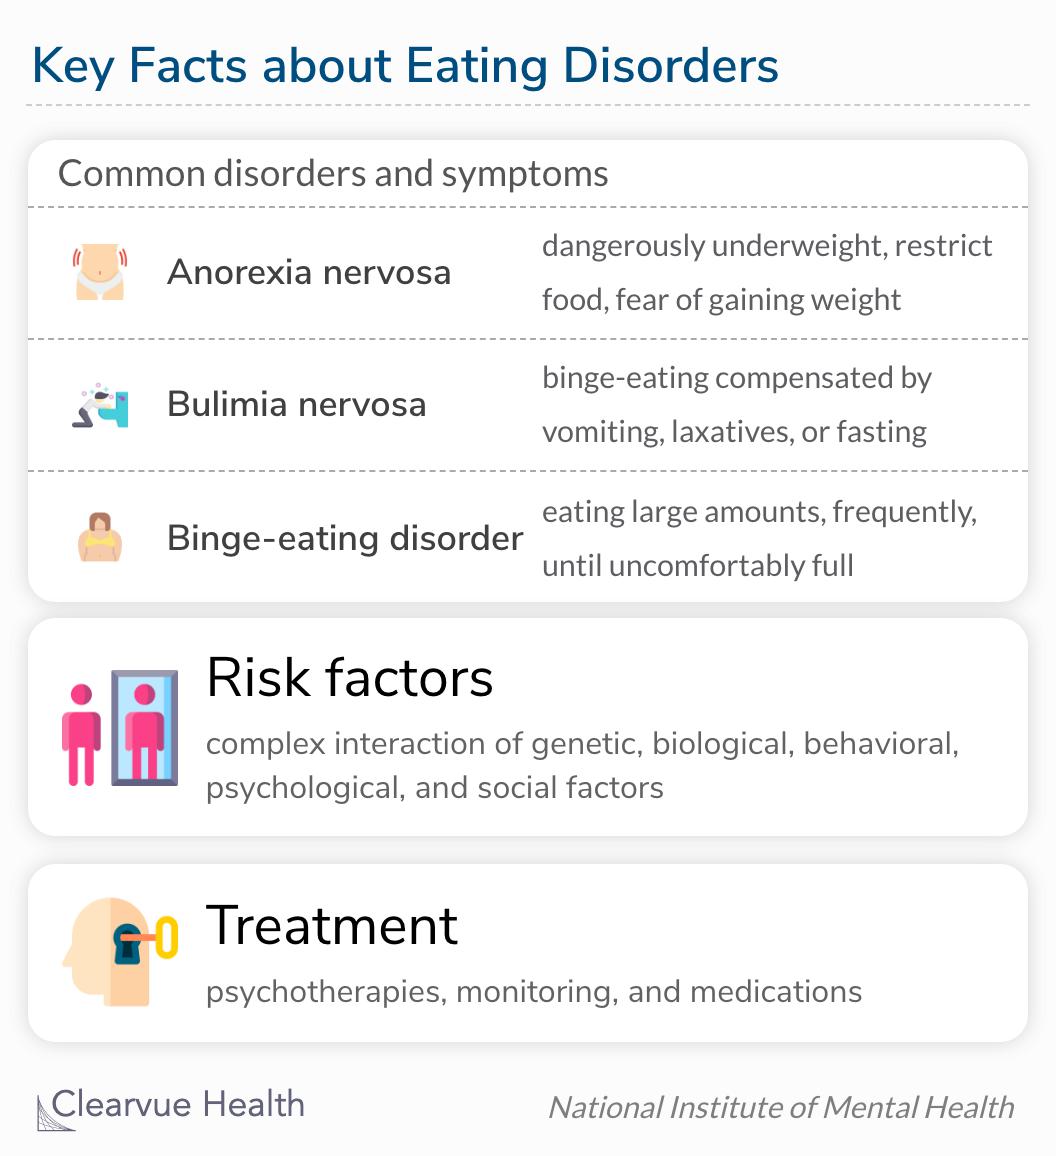 Key Factors about Eating Disorders